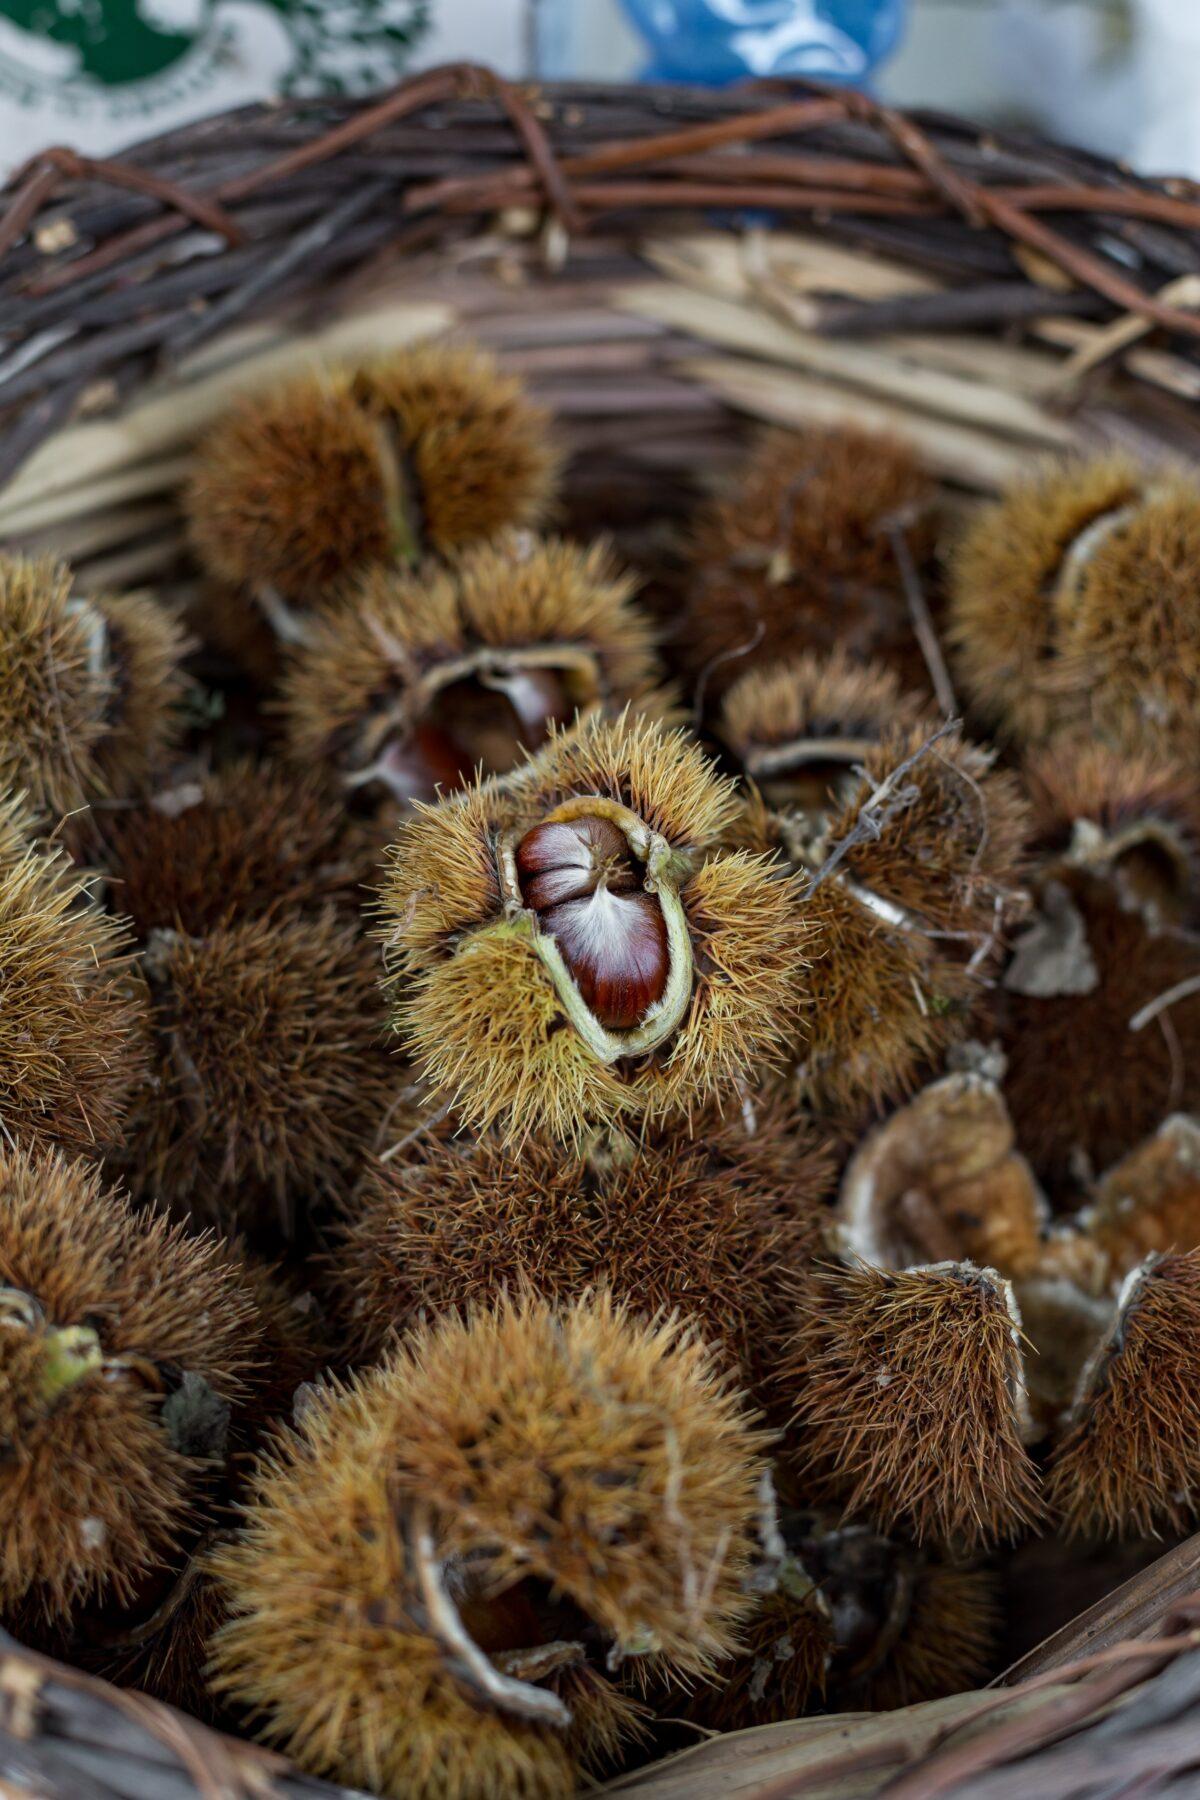 Harvested chestnuts, still encased in their protective burrs. (Giulia Scarpaleggia and Tommaso Galli)